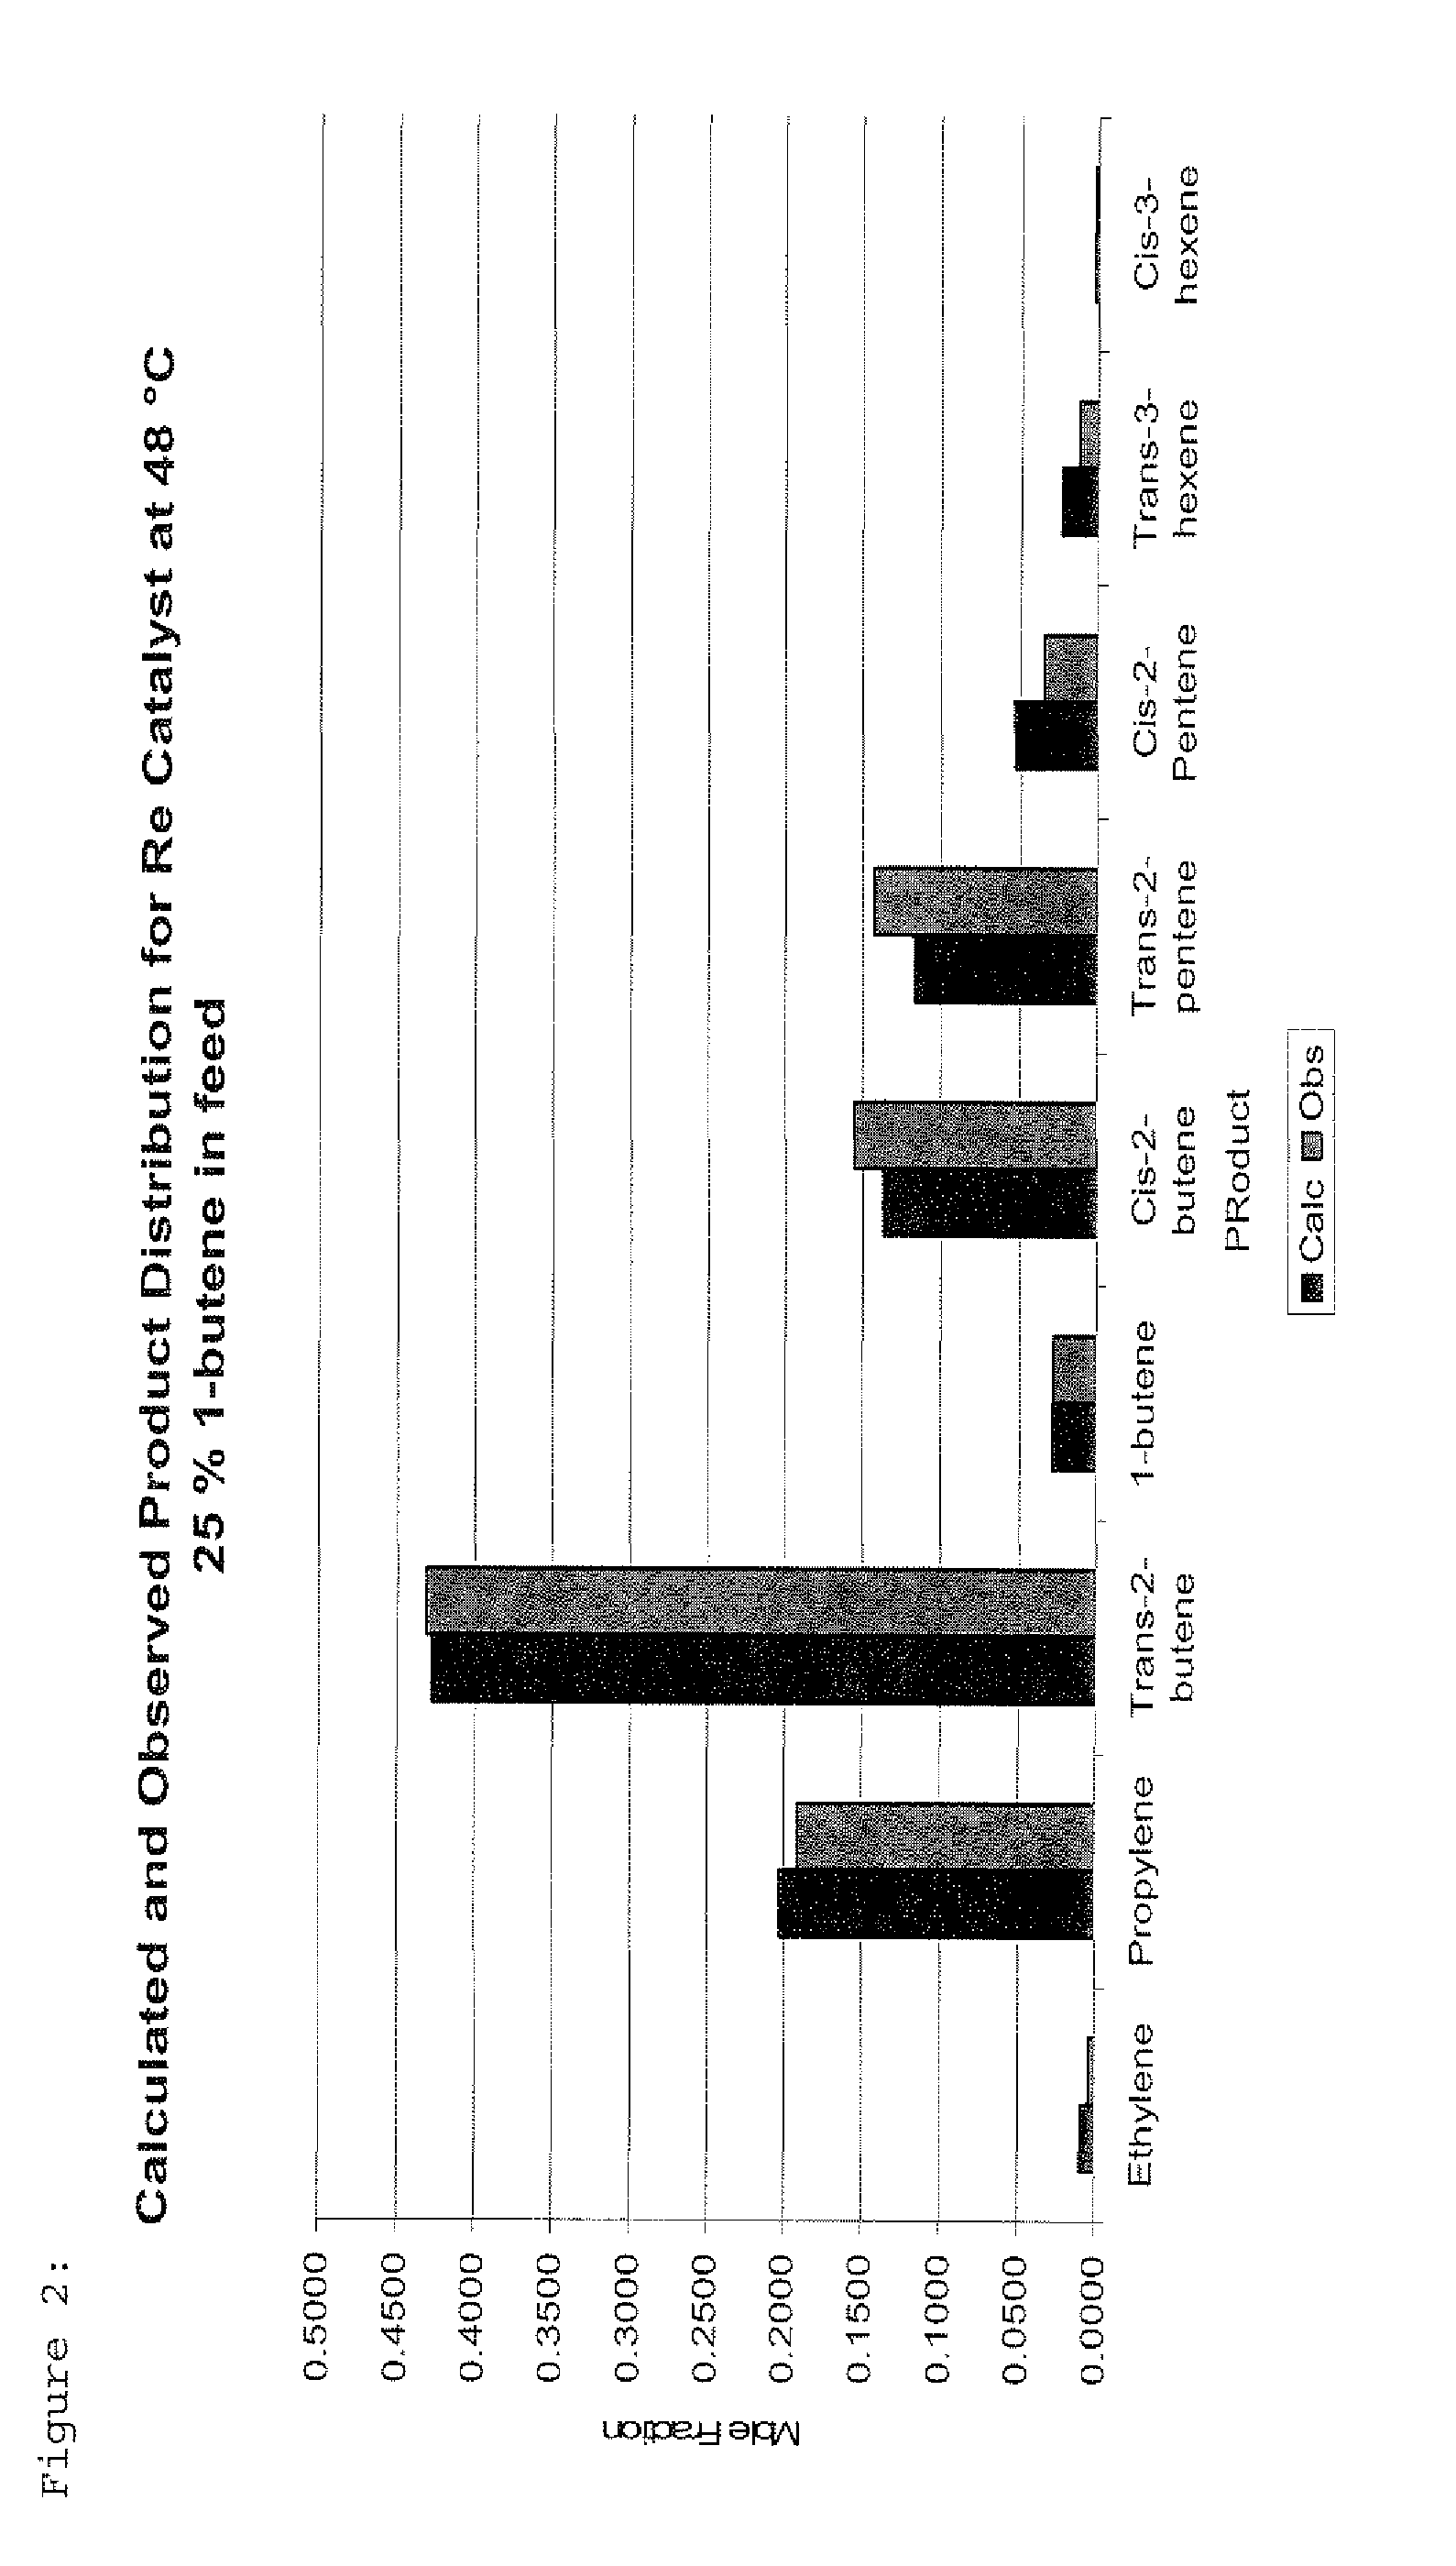 Process for Producing Propylene and Aromatics from Butenes by Metathesis and Aromatization